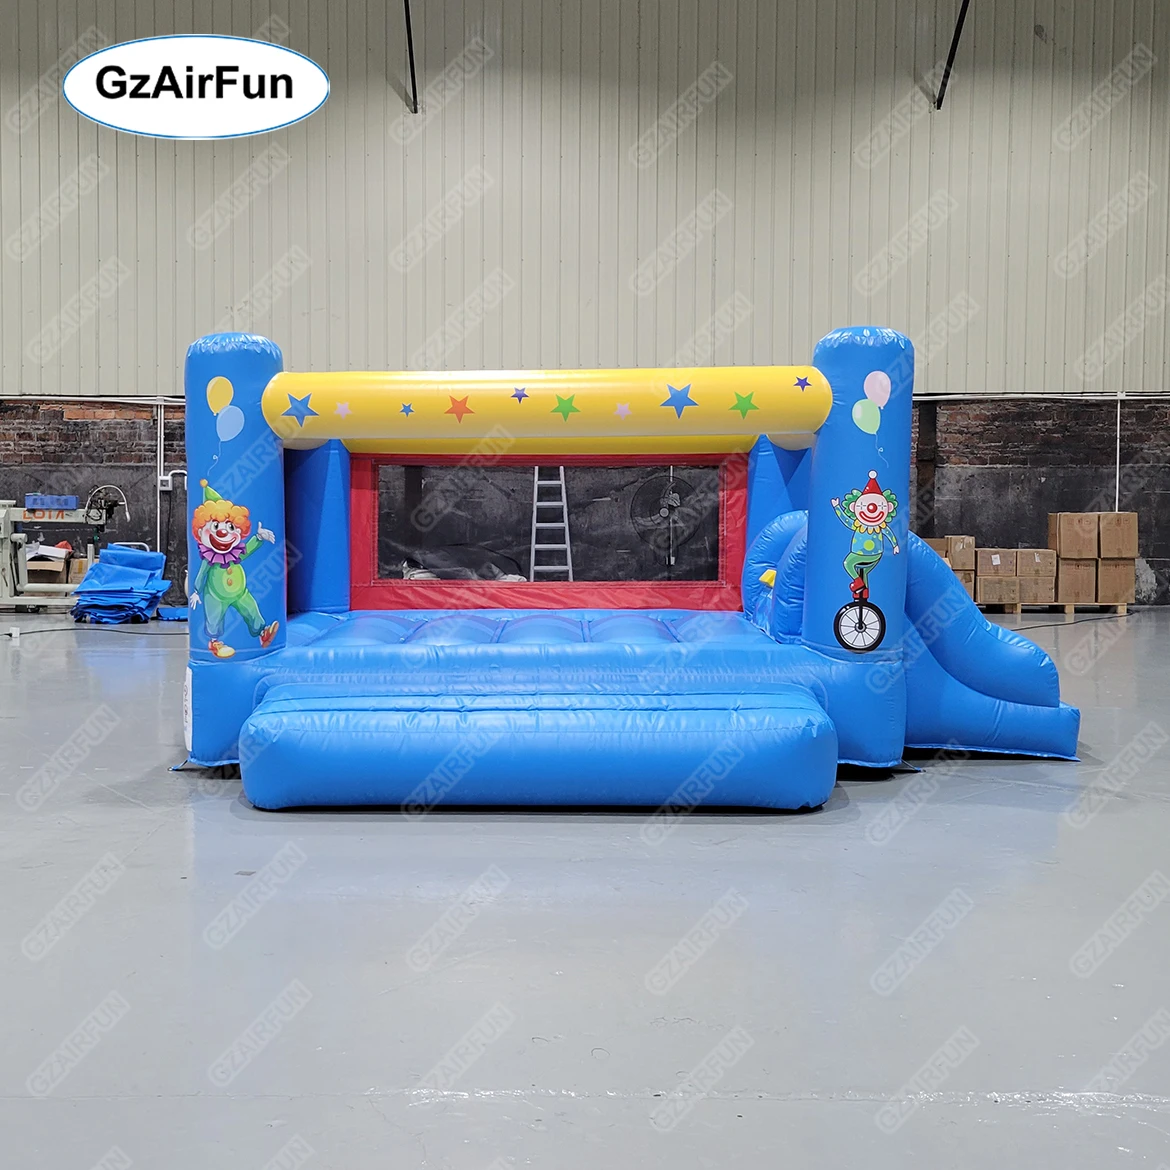 

Commercial kids inflatable trampoline bouncy castle bounce house with slide